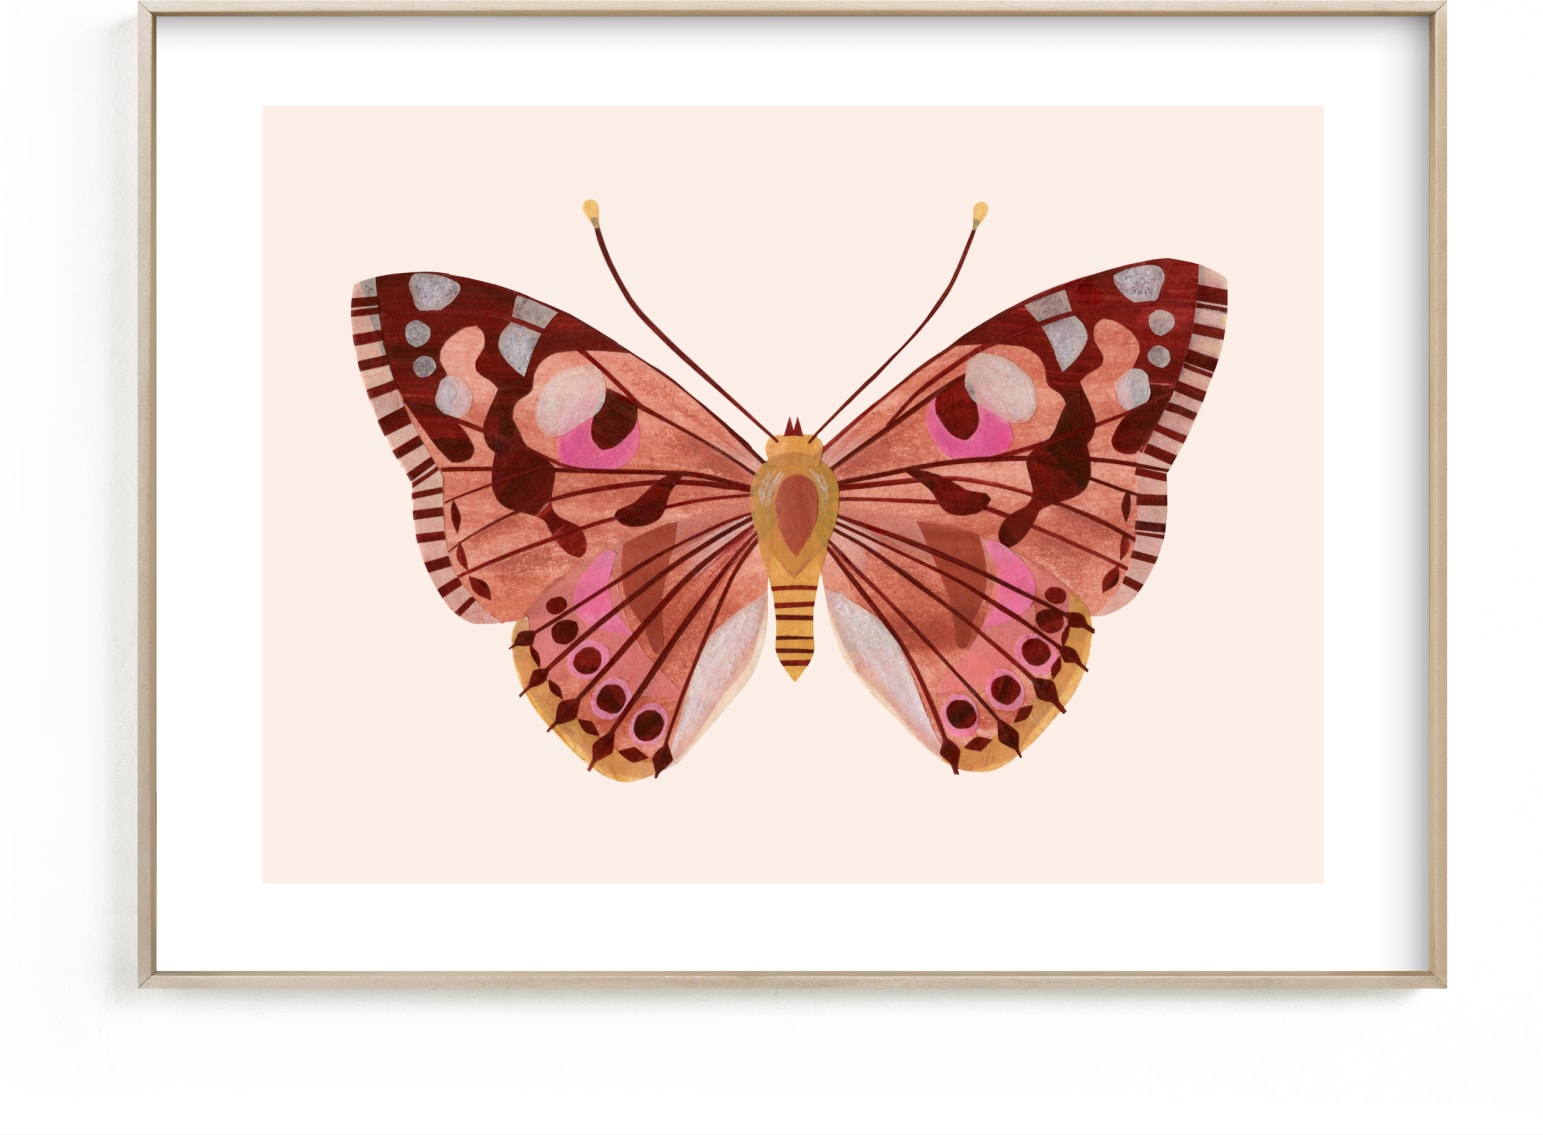 This is a brown, ivory, pink art by Sarah Knight called Paper Wings.